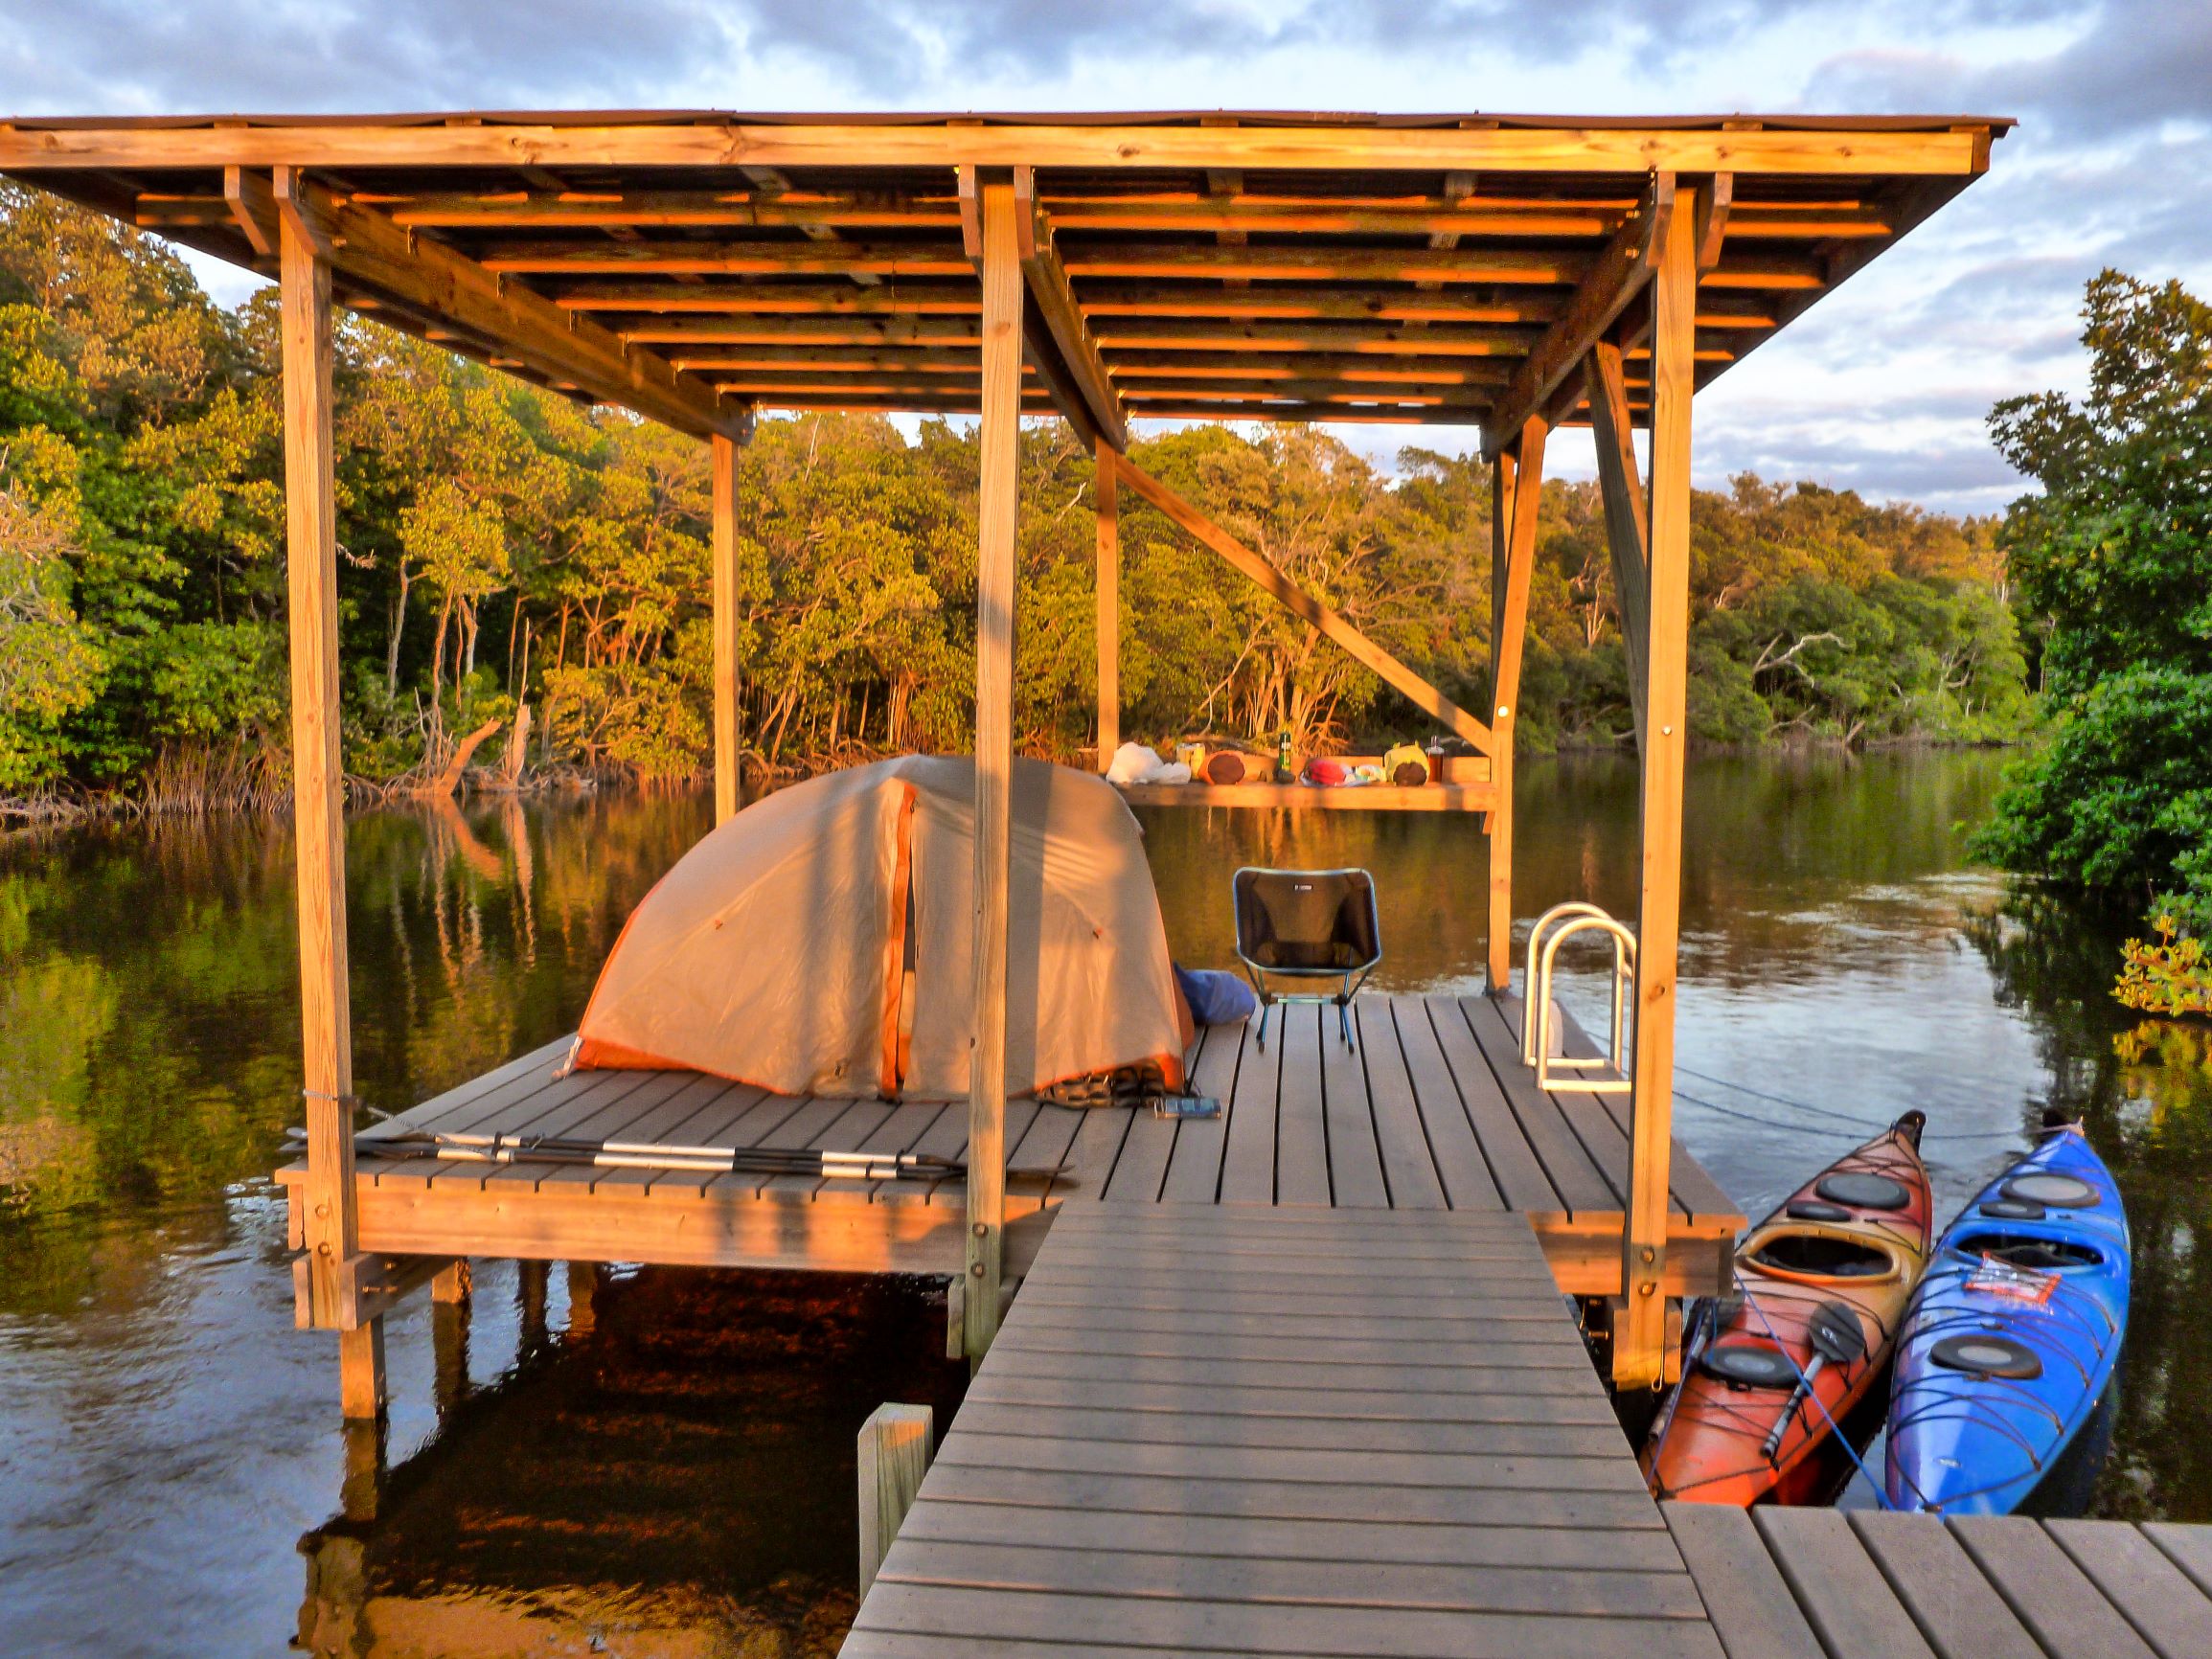 Elevated wooden camping platform with pitched tent and red and blue kayaks on a mangrove waterway.